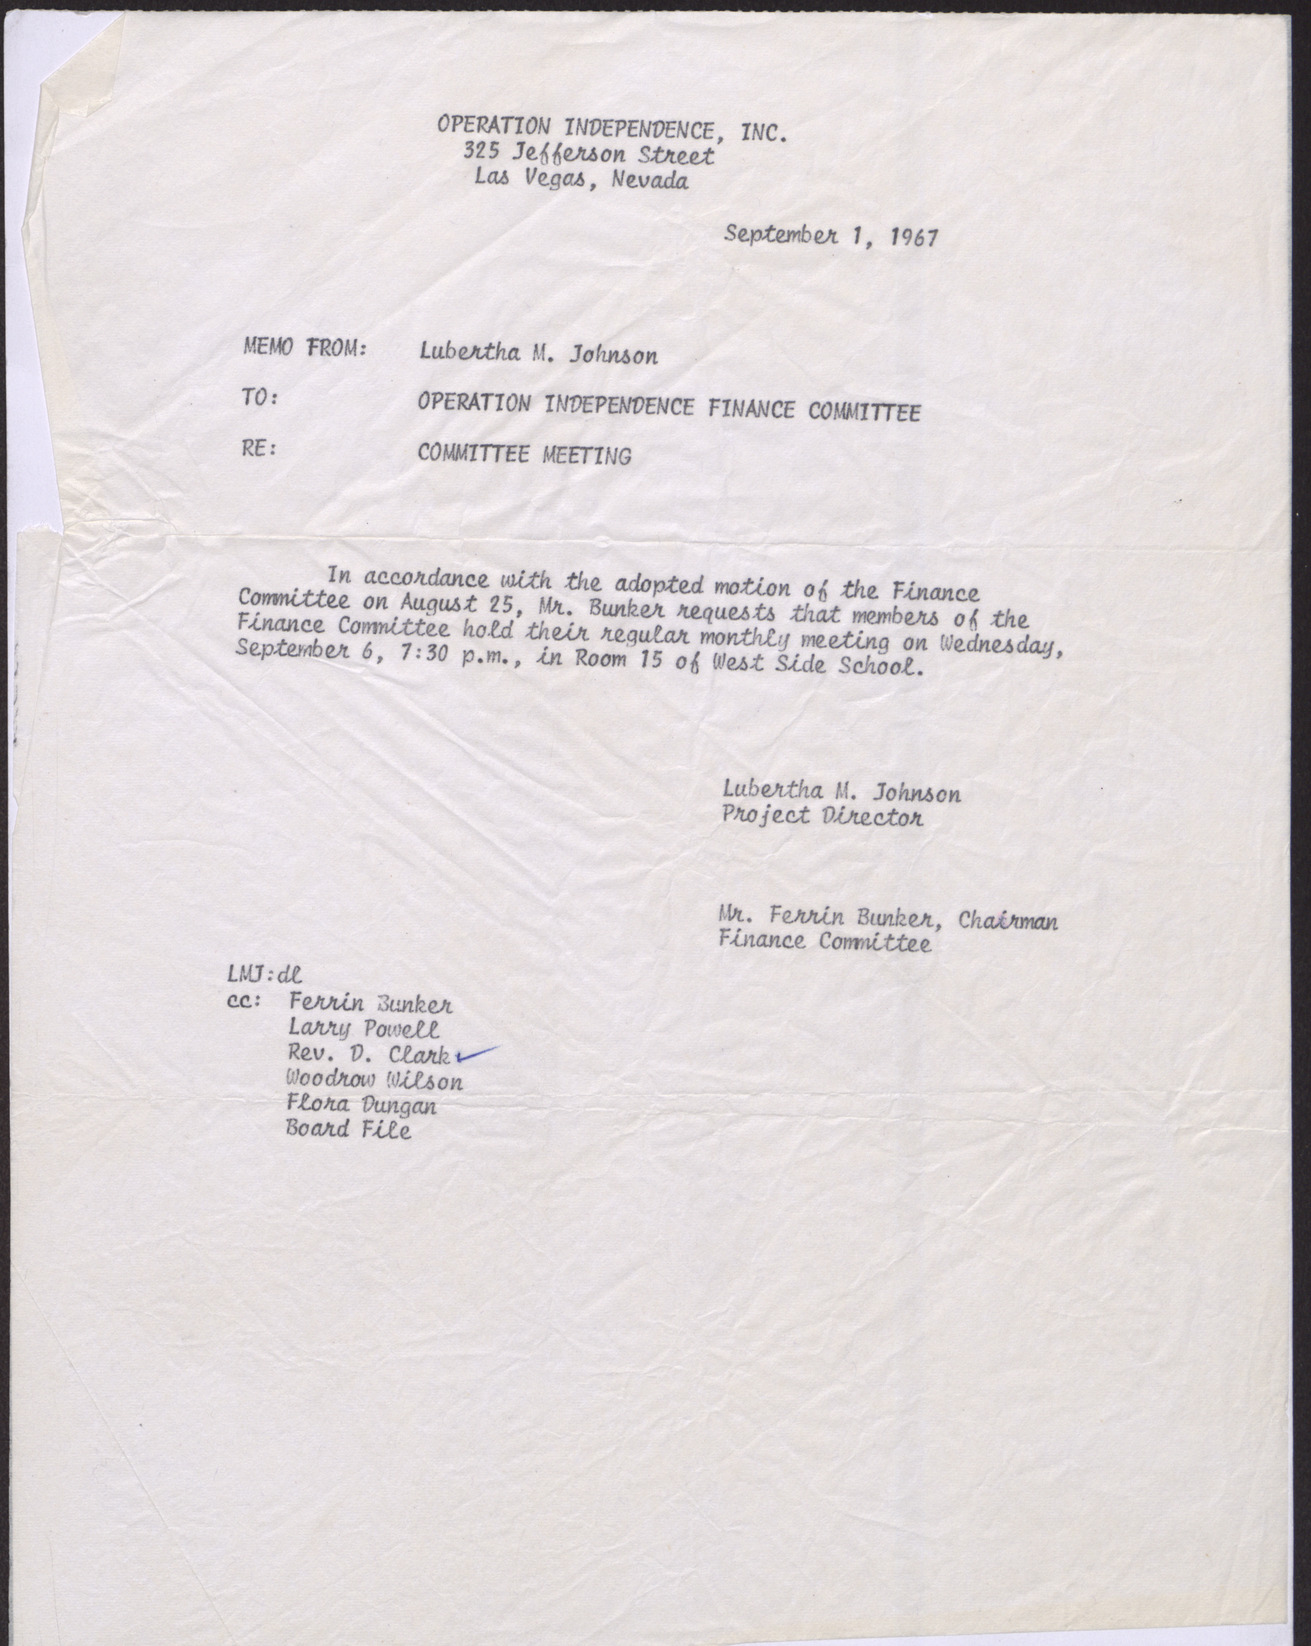 Memo to Operation Independence Finance Committee from Lubertha M. Johnson, September 1, 1967